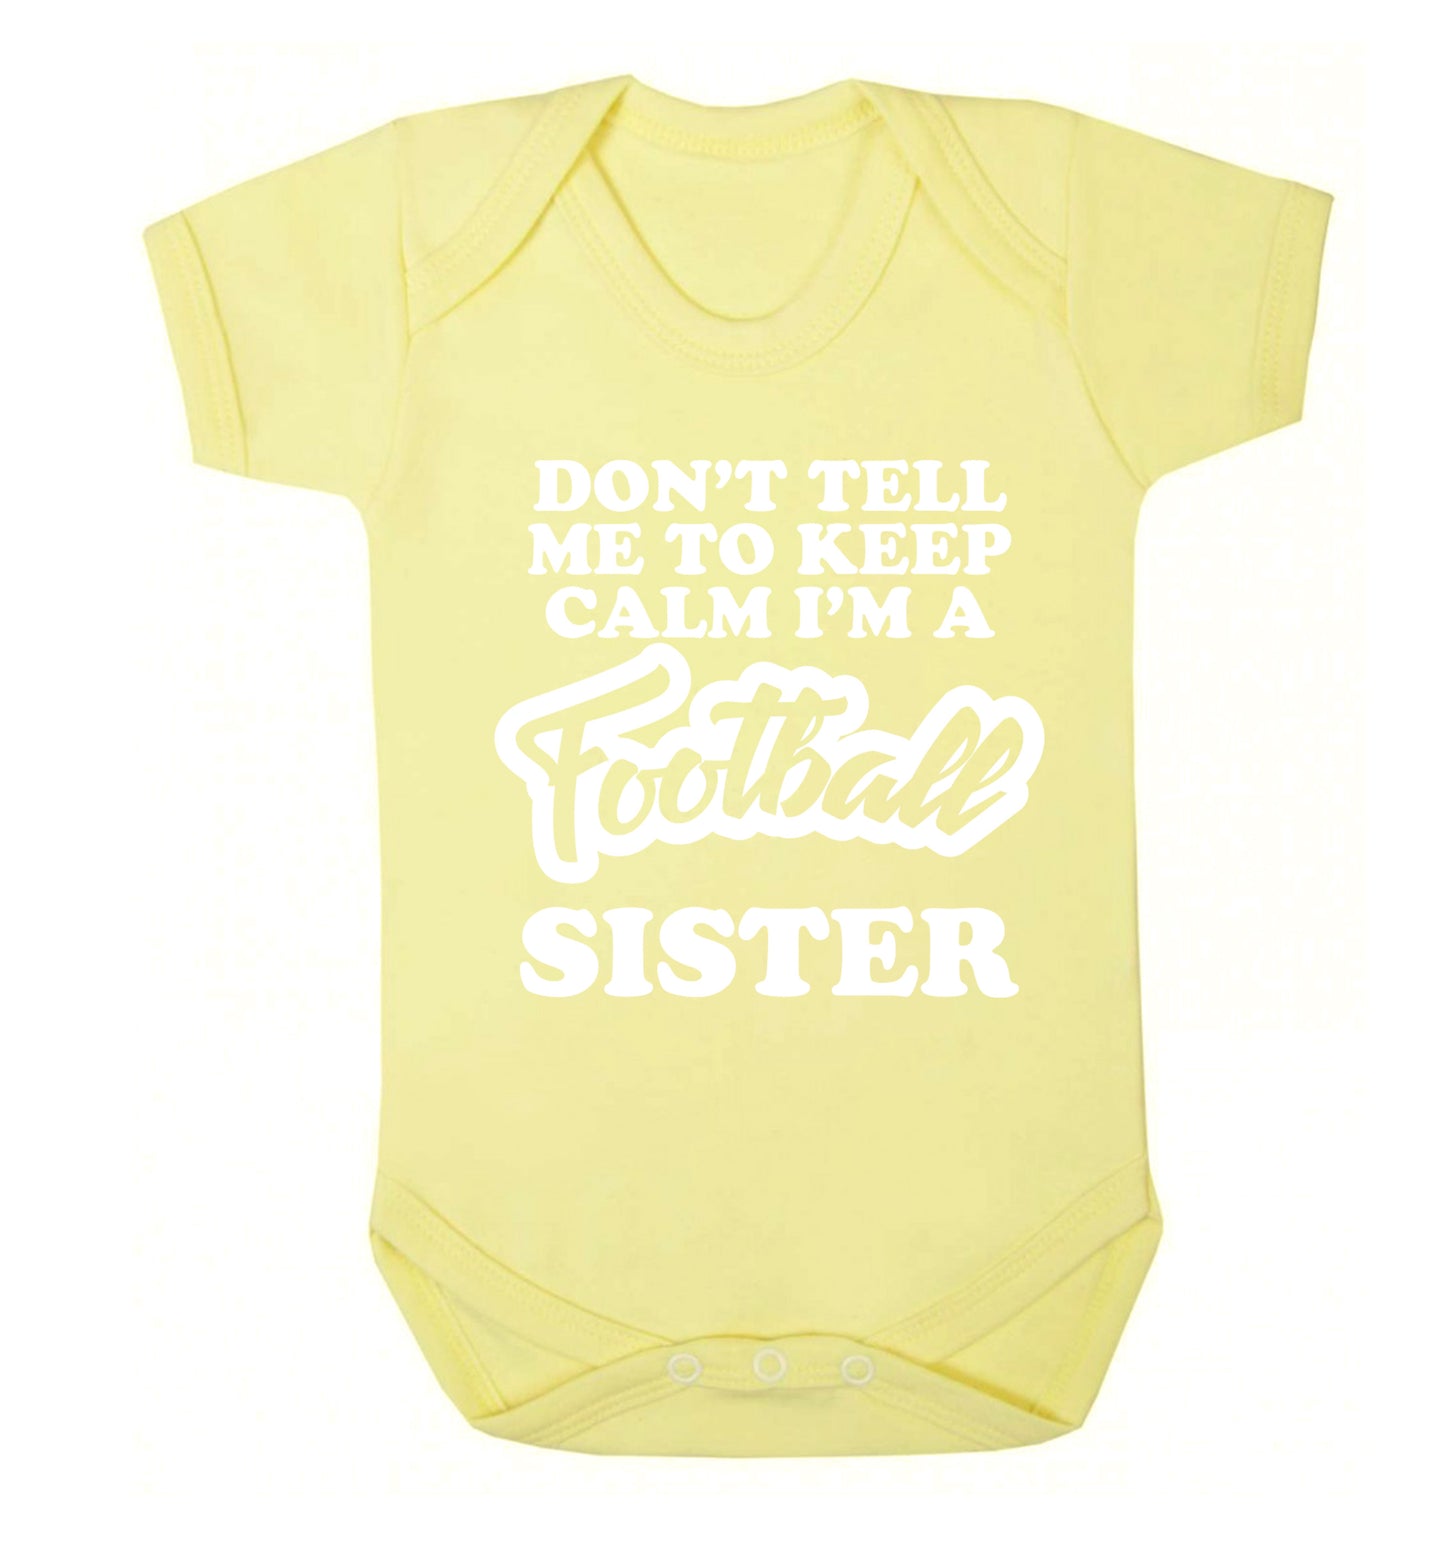 Don't tell me to keep calm I'm a football sister Baby Vest pale yellow 18-24 months